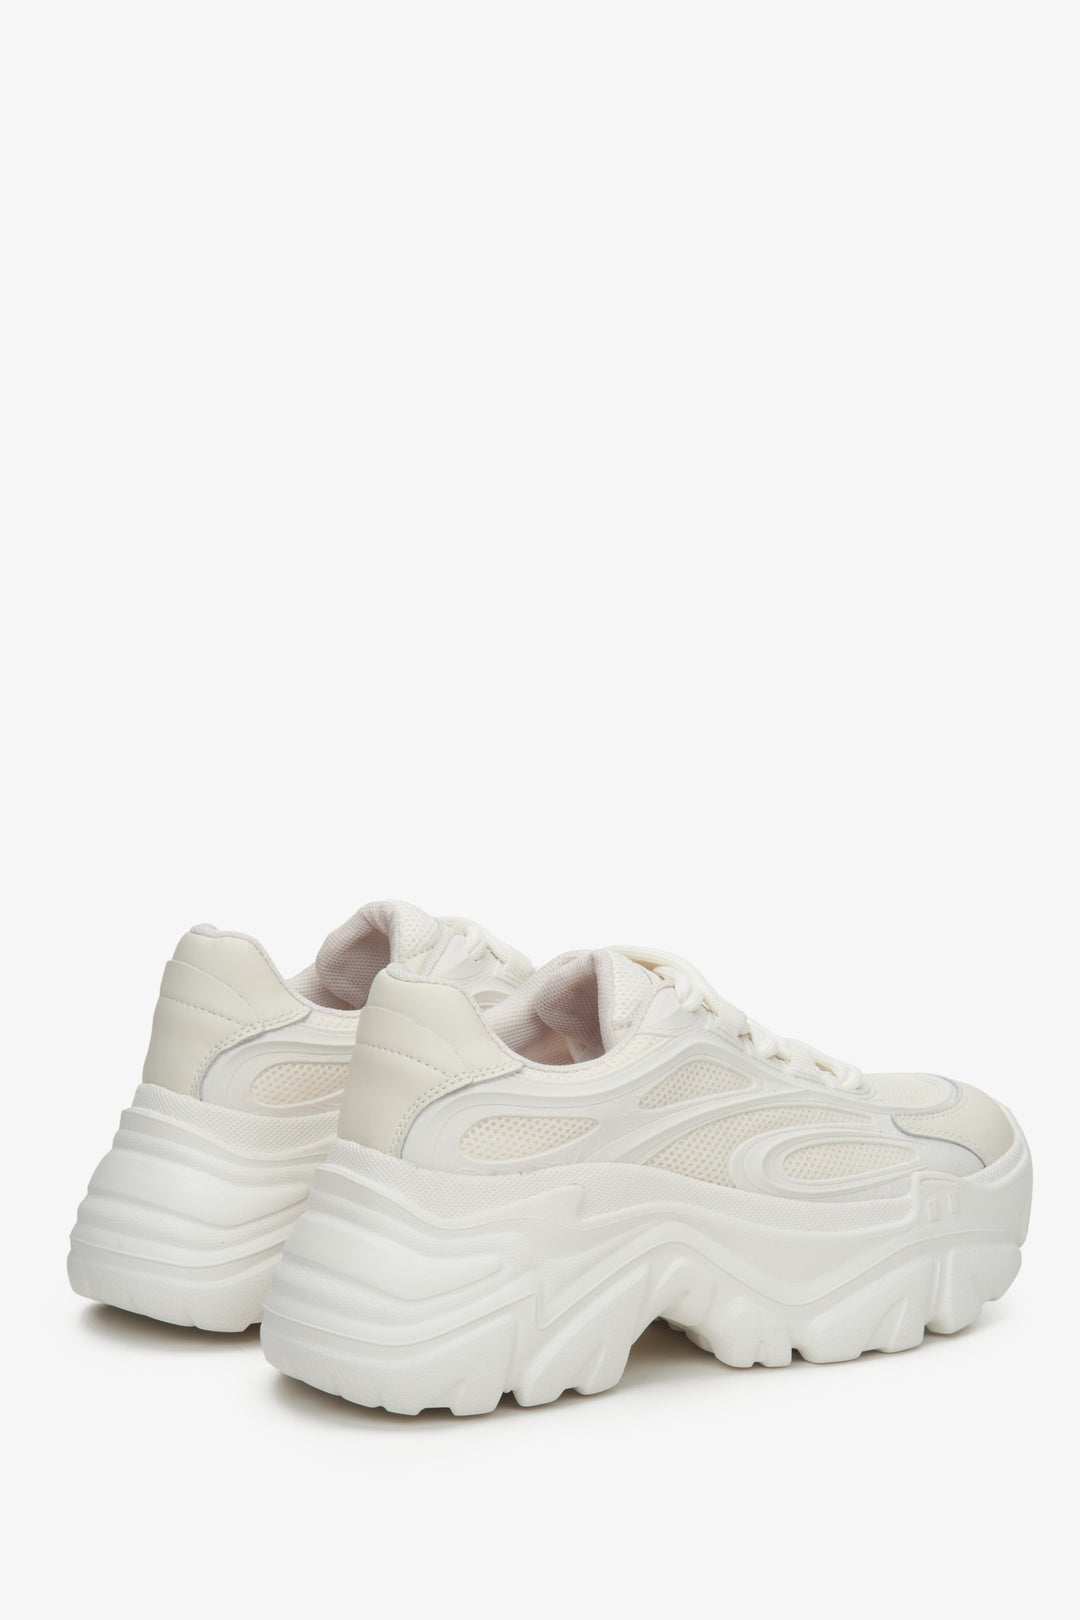 Light beige chunky platform sneakers by ES 8 made of leather and textile.